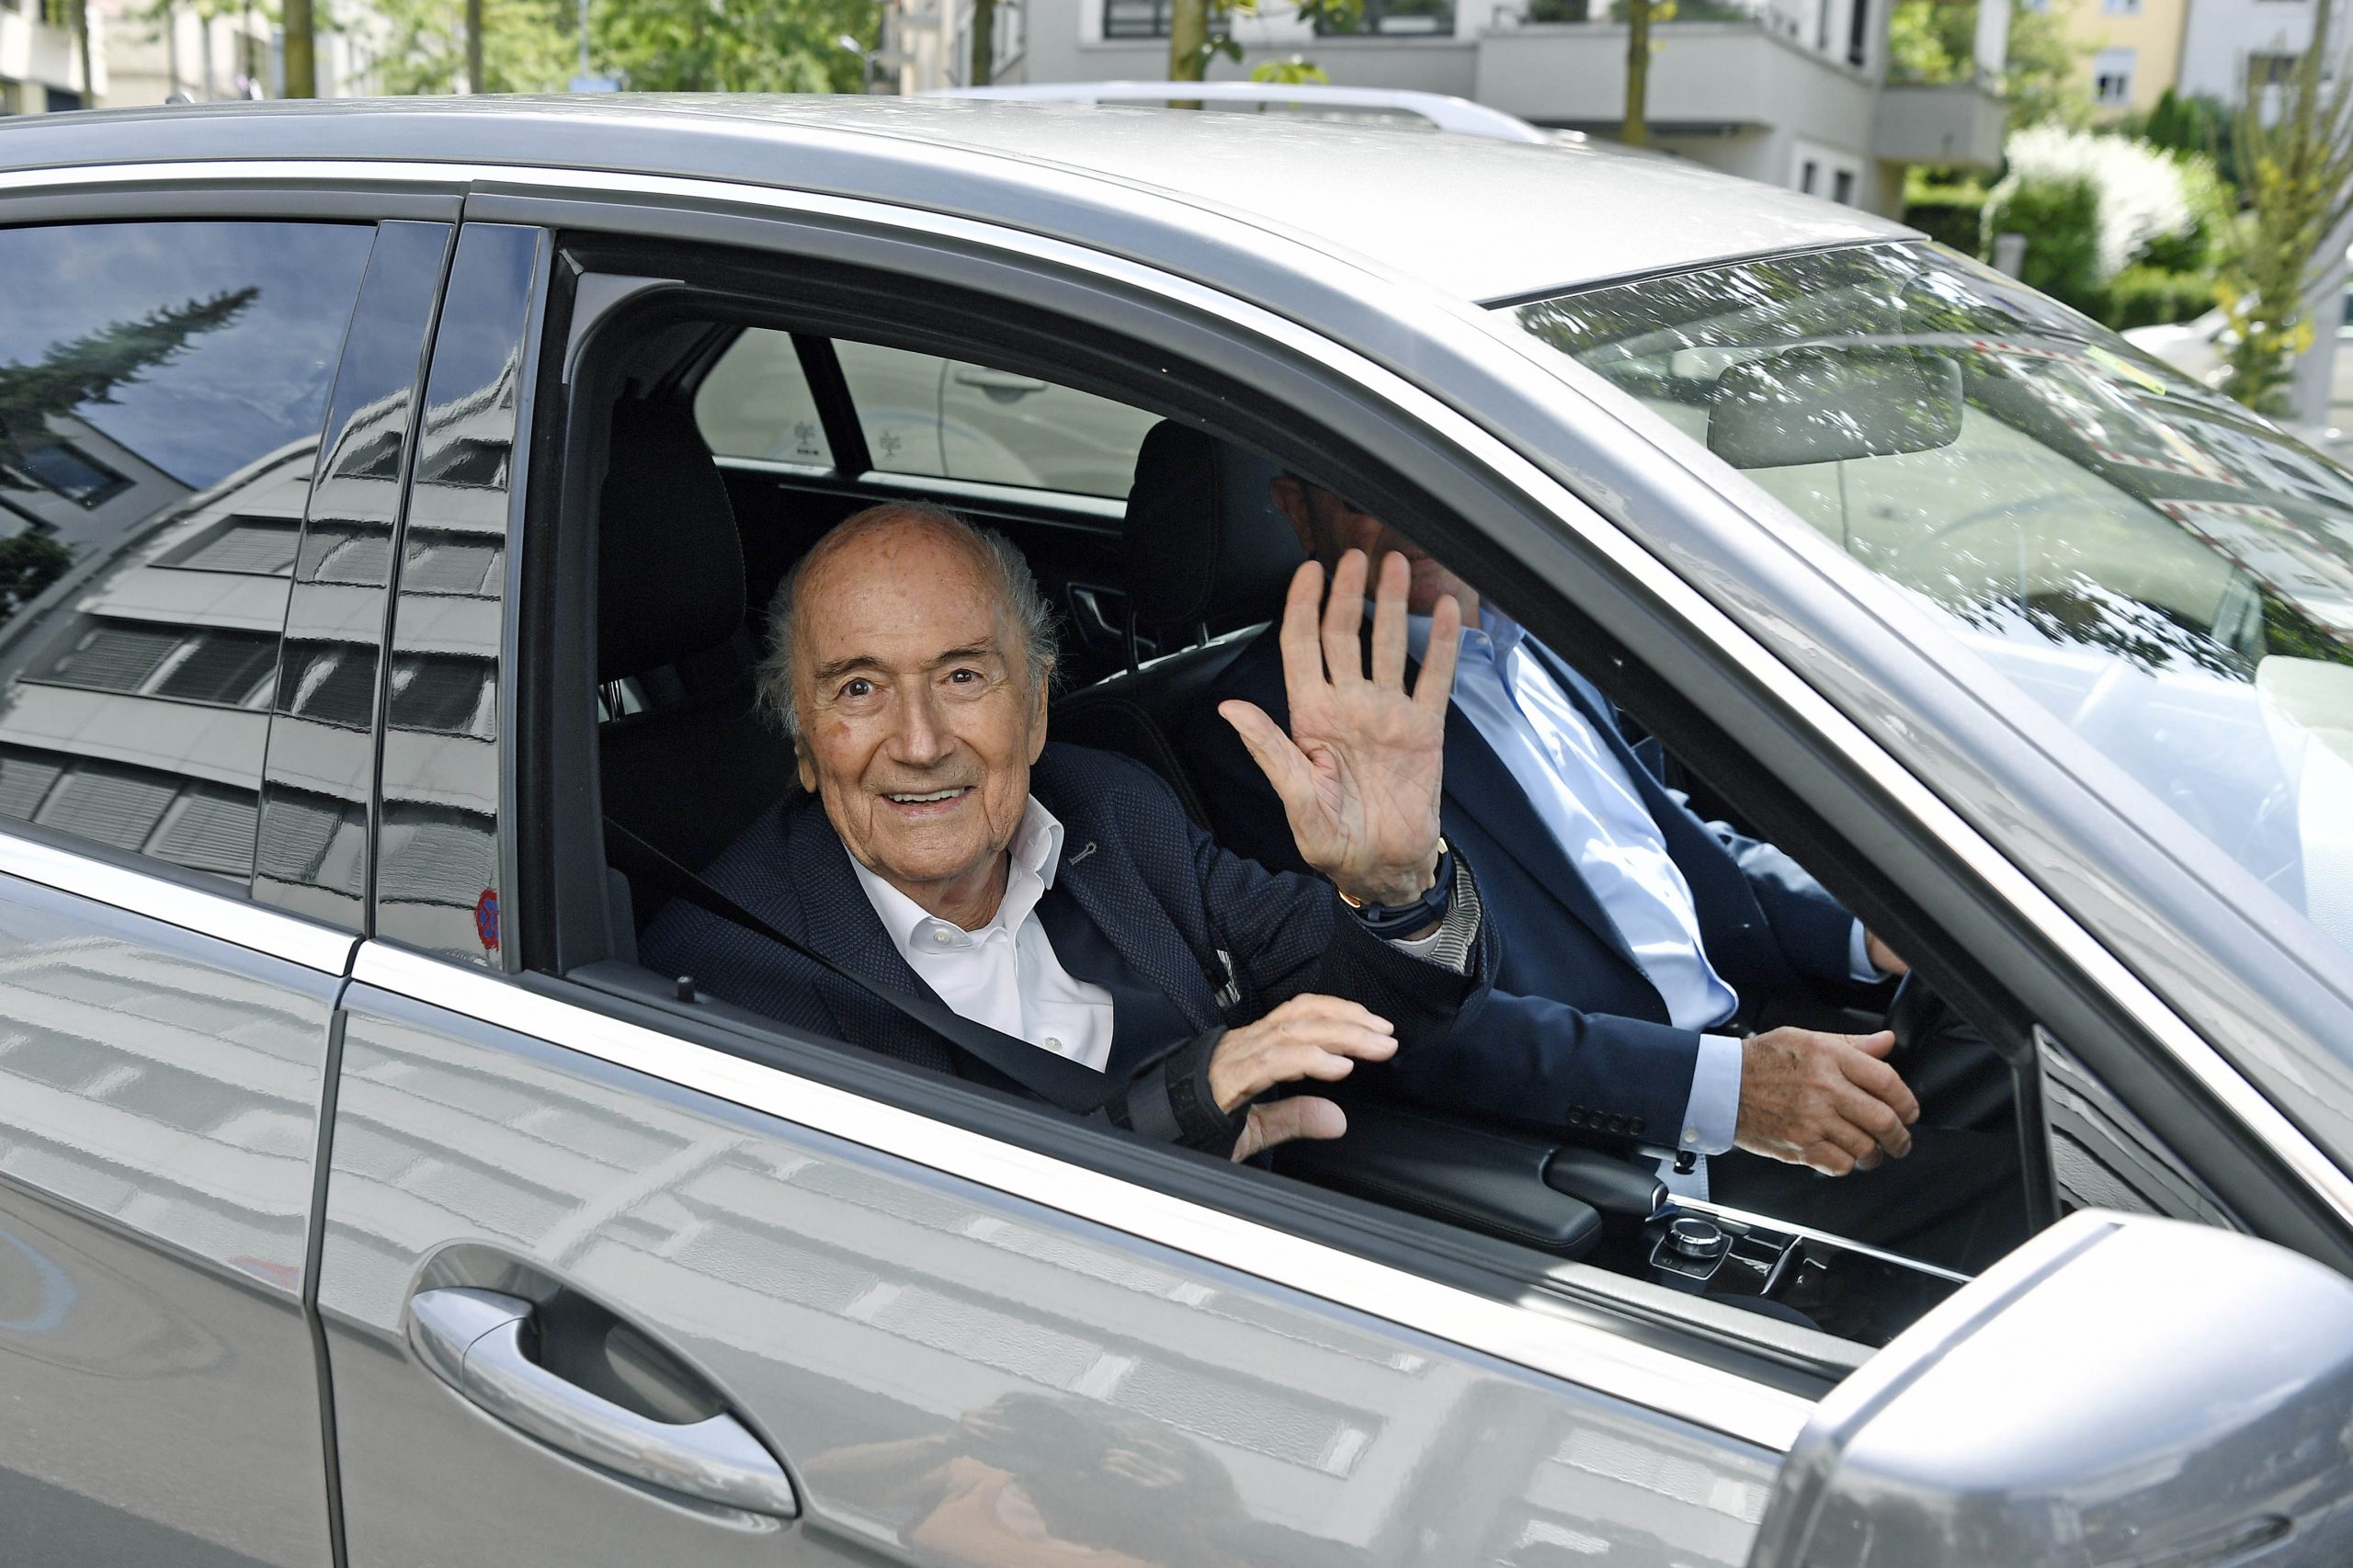 Sepp Blatter, Michel Platini indicted by Swiss authorities for fraud